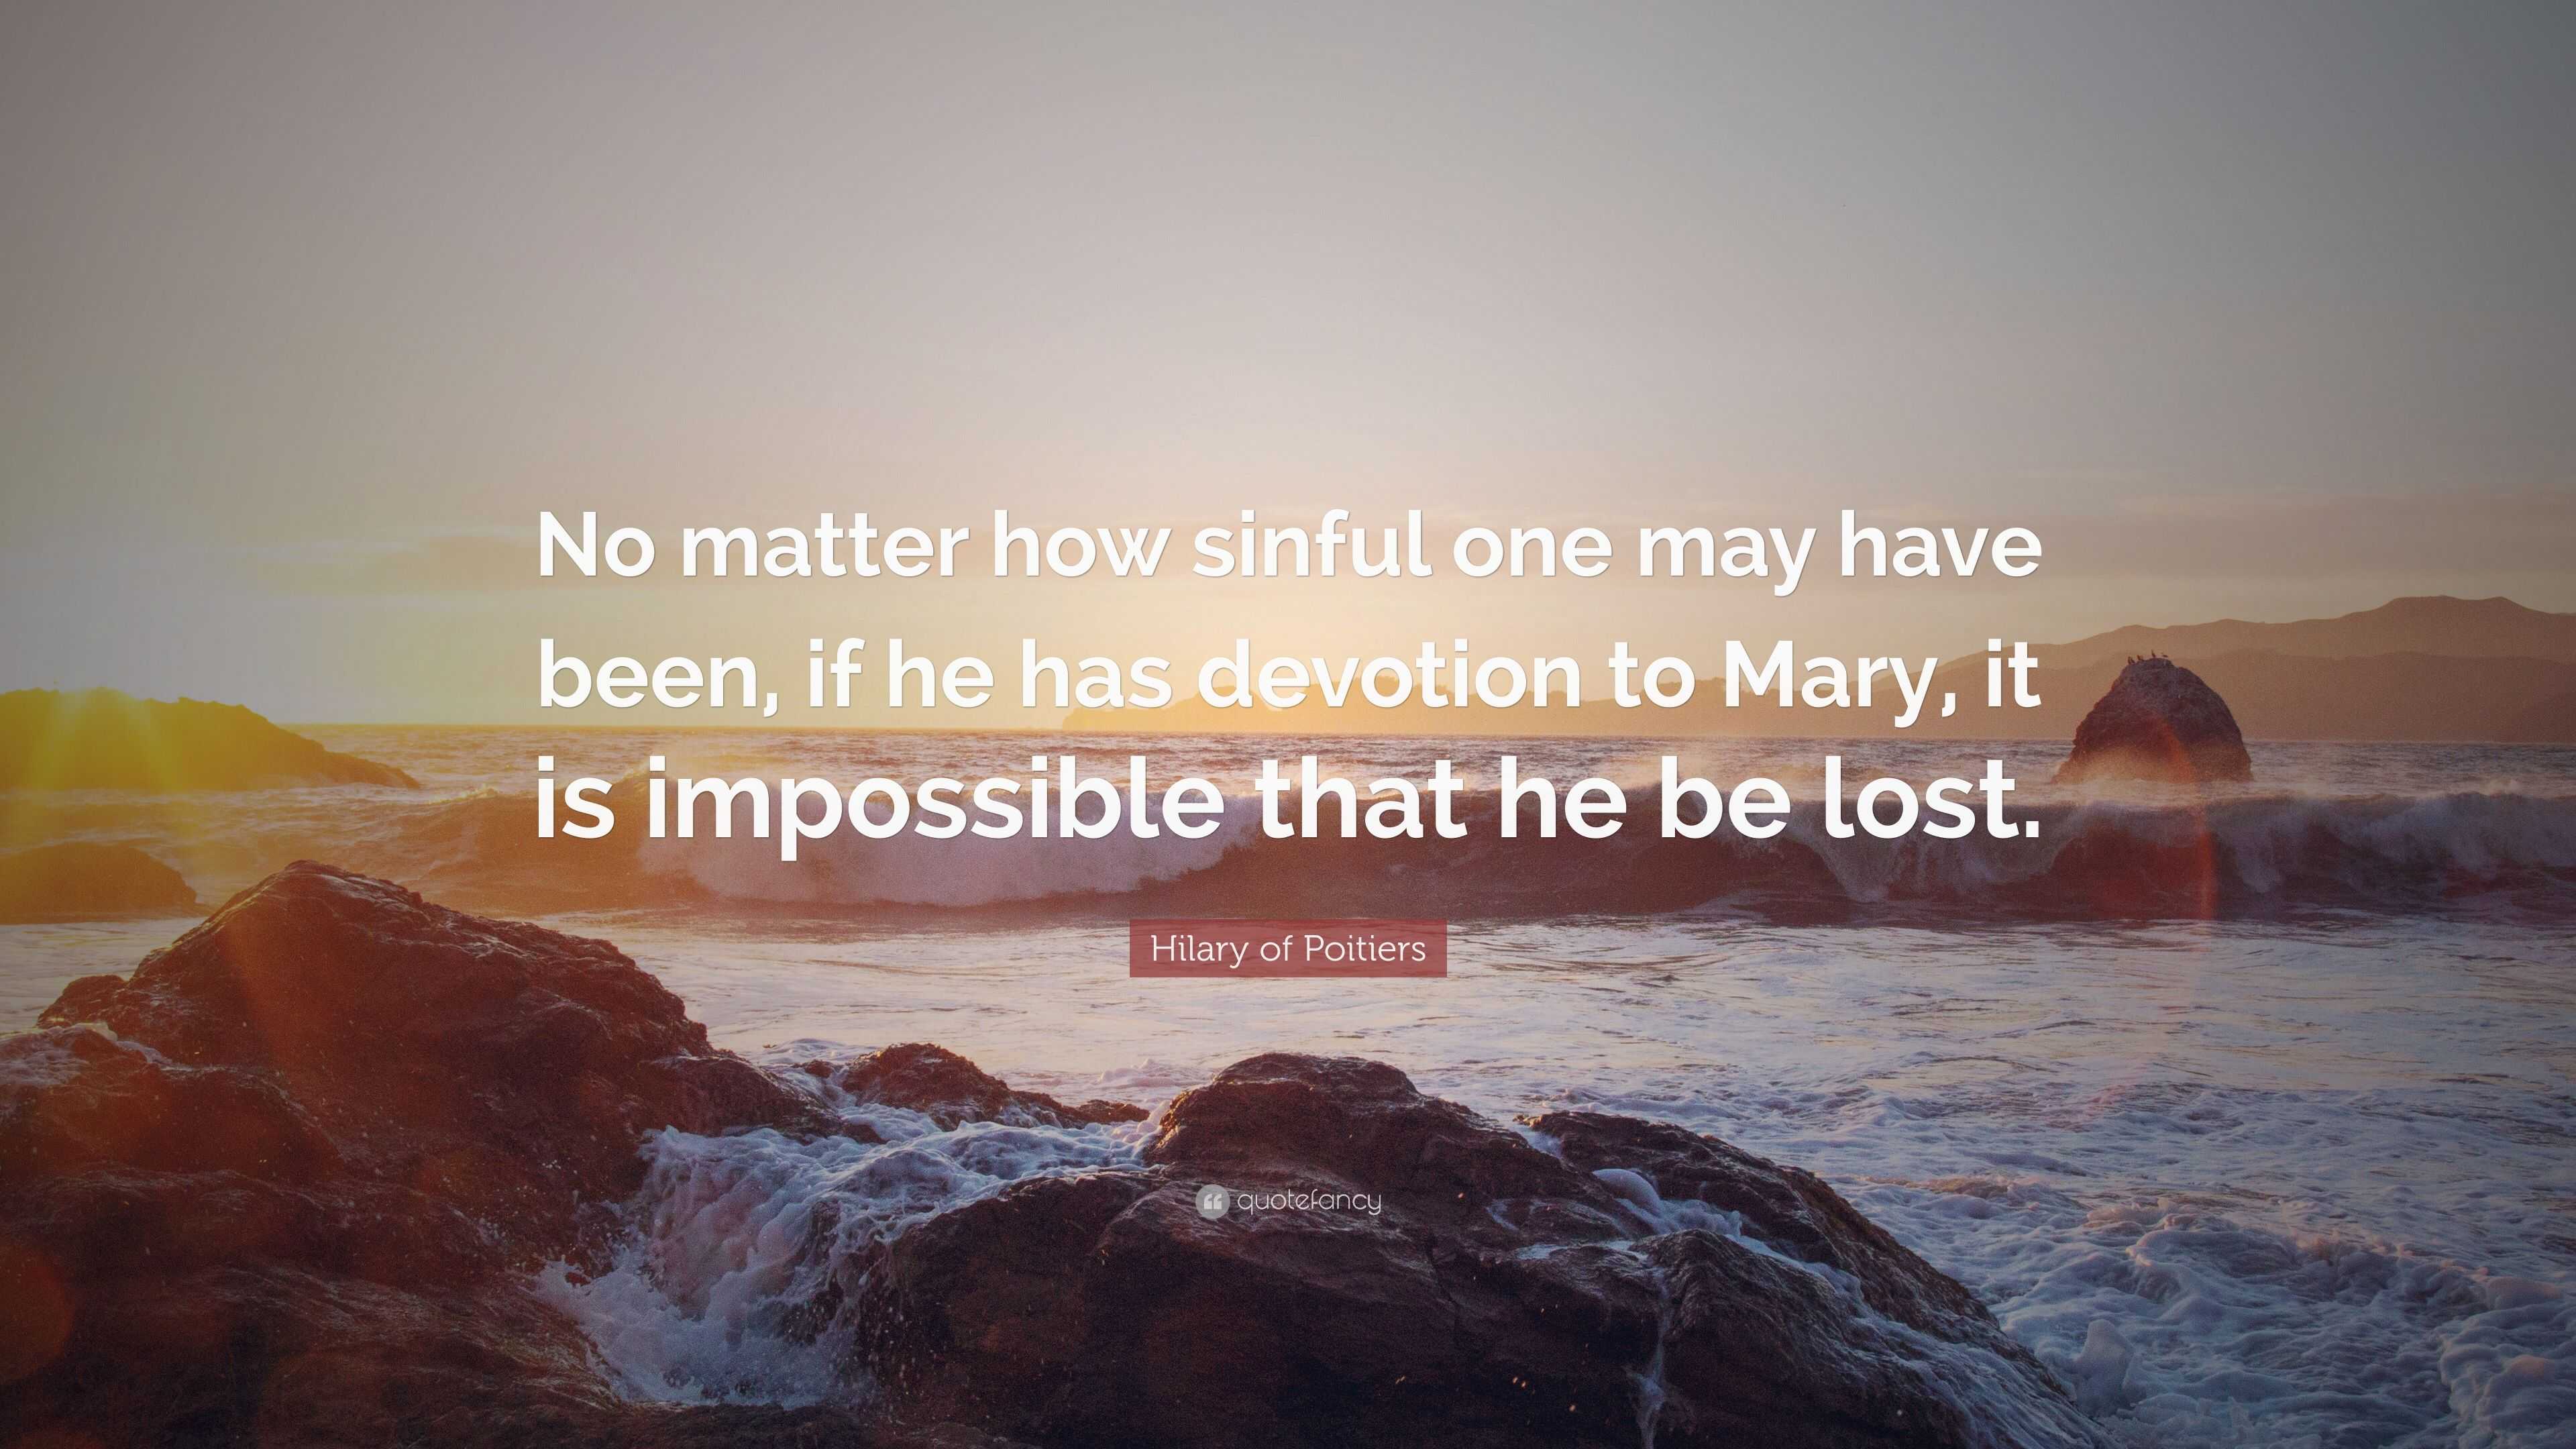 Hilary of Poitiers Quote “No matter how sinful one may have been, if